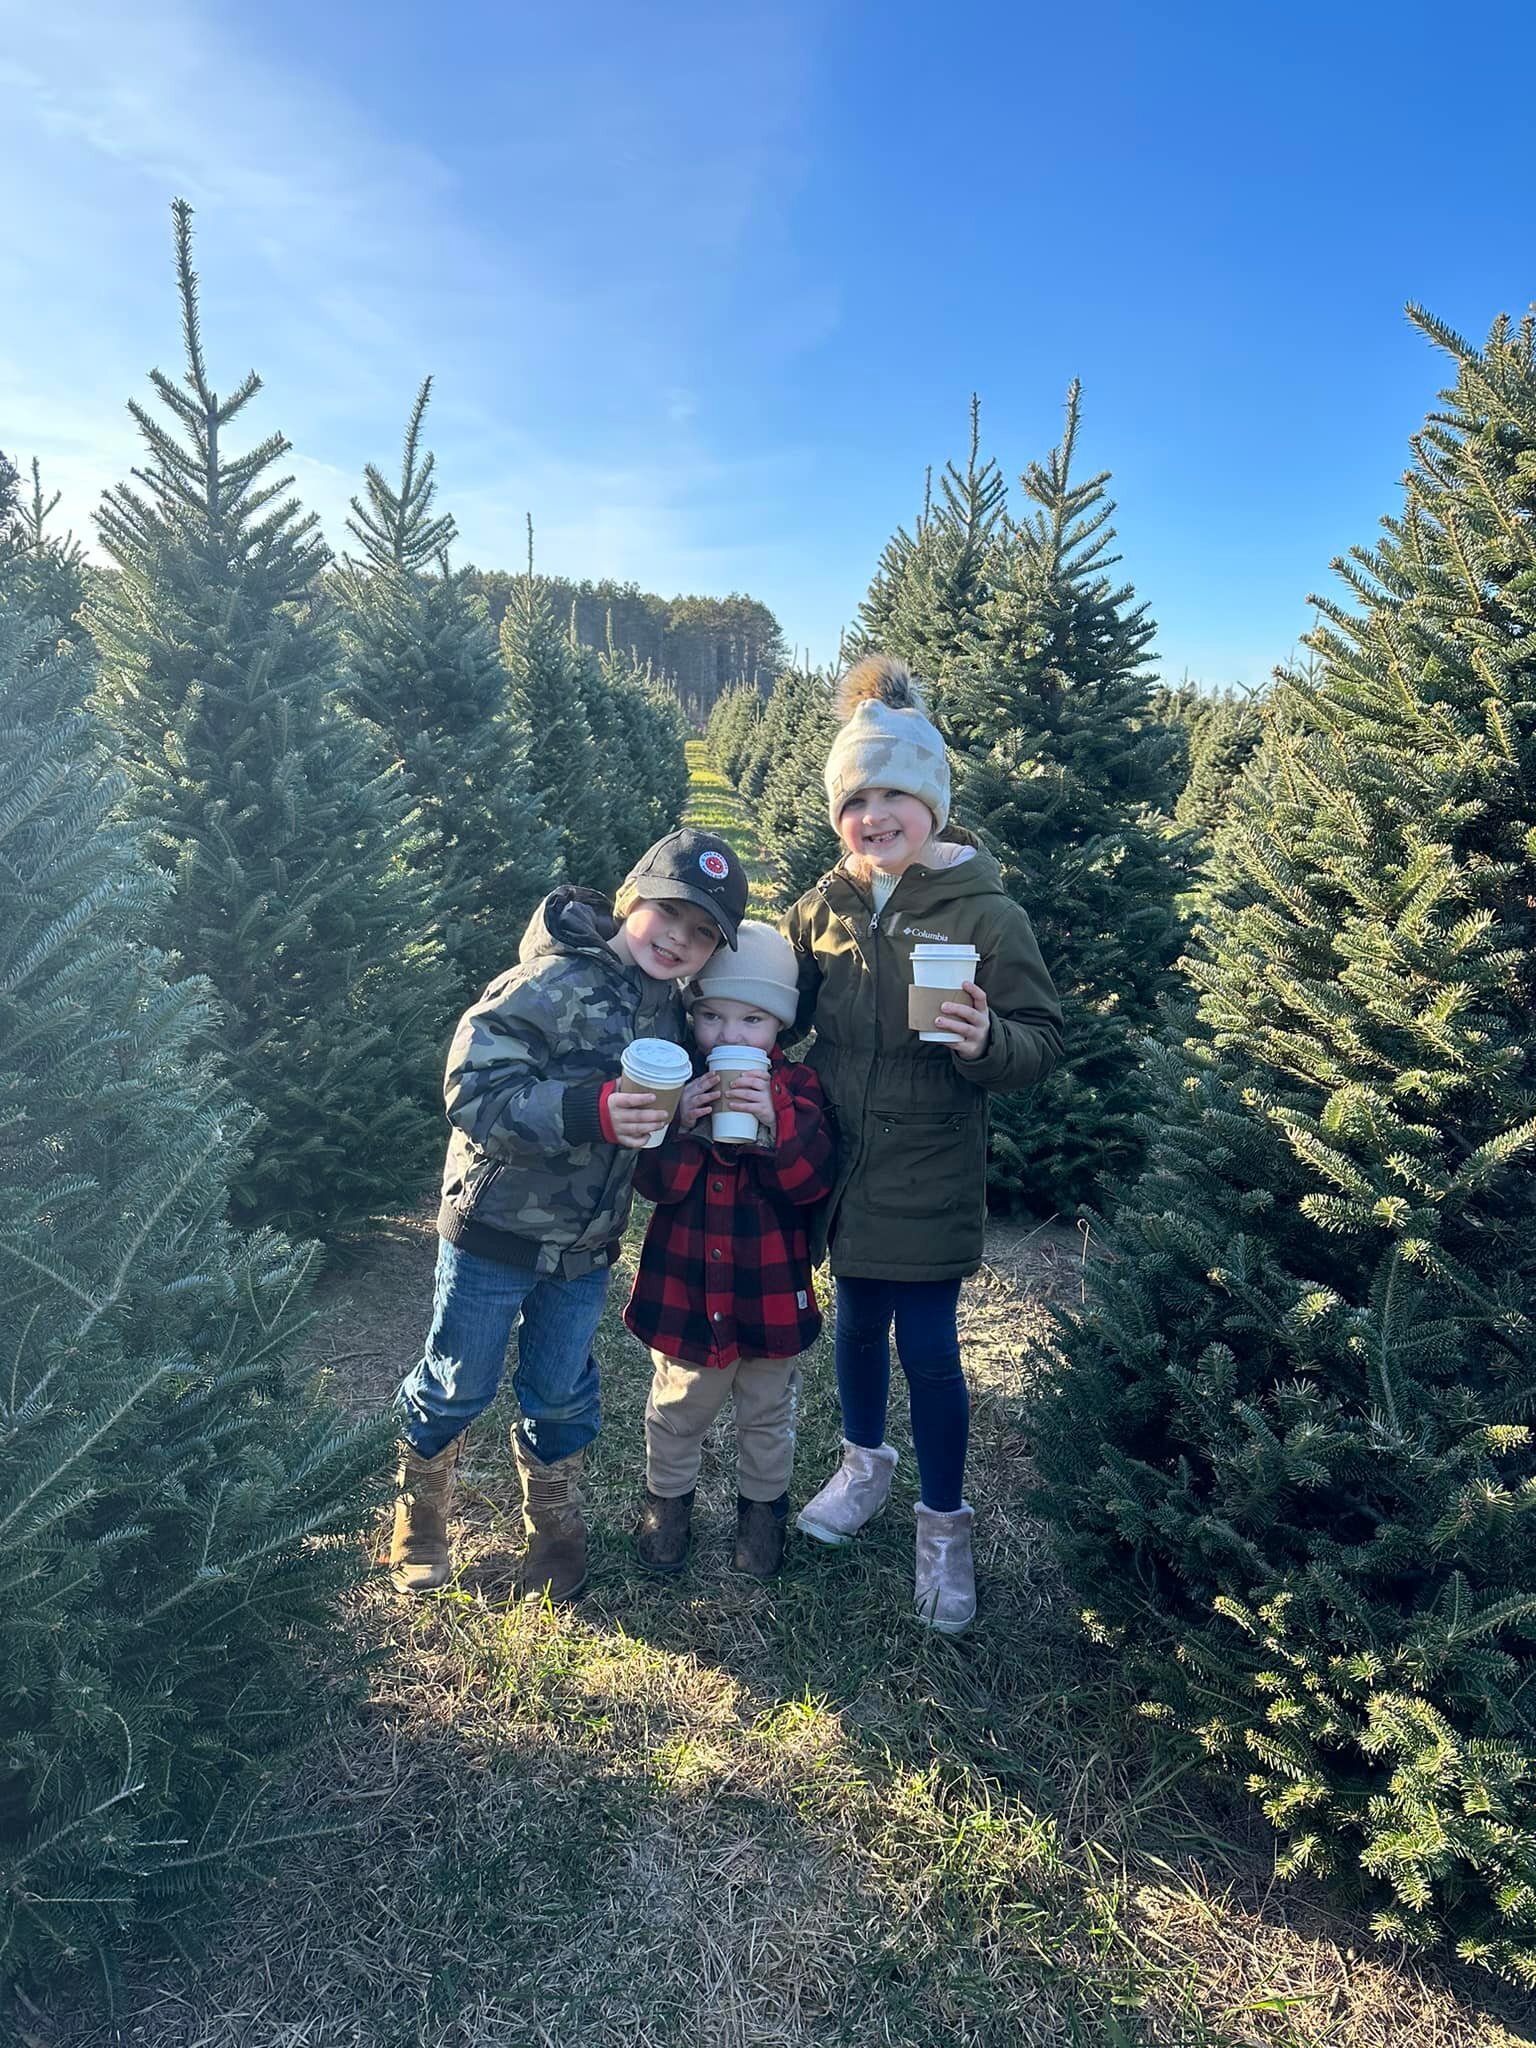 Picking the perfect Christmas tree 🎄